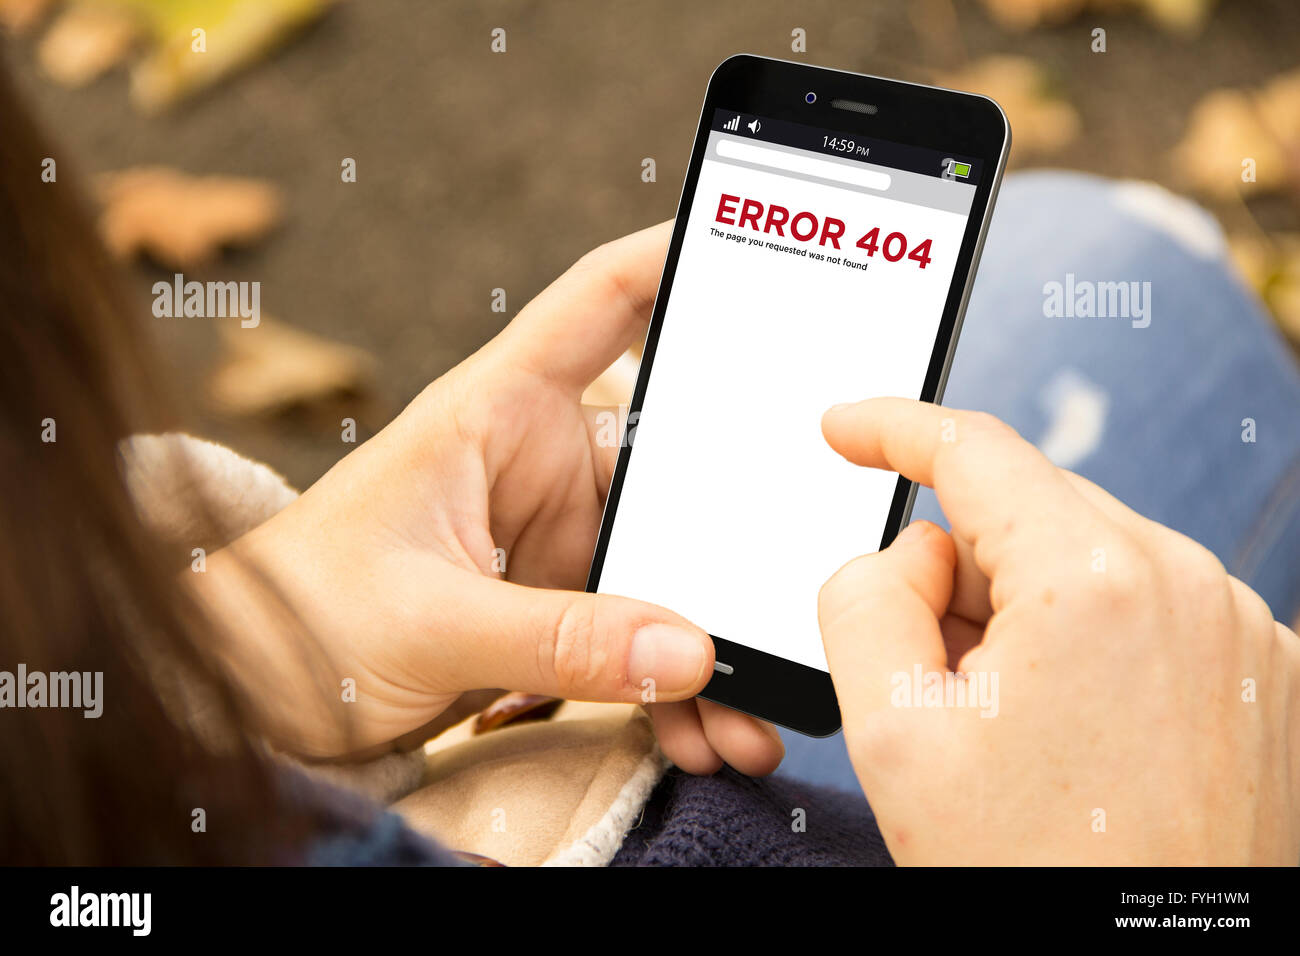 navigation concept: woman holding a 3d generated smartphone with error 404 on the screen. Graphics on screen are made up. Stock Photo